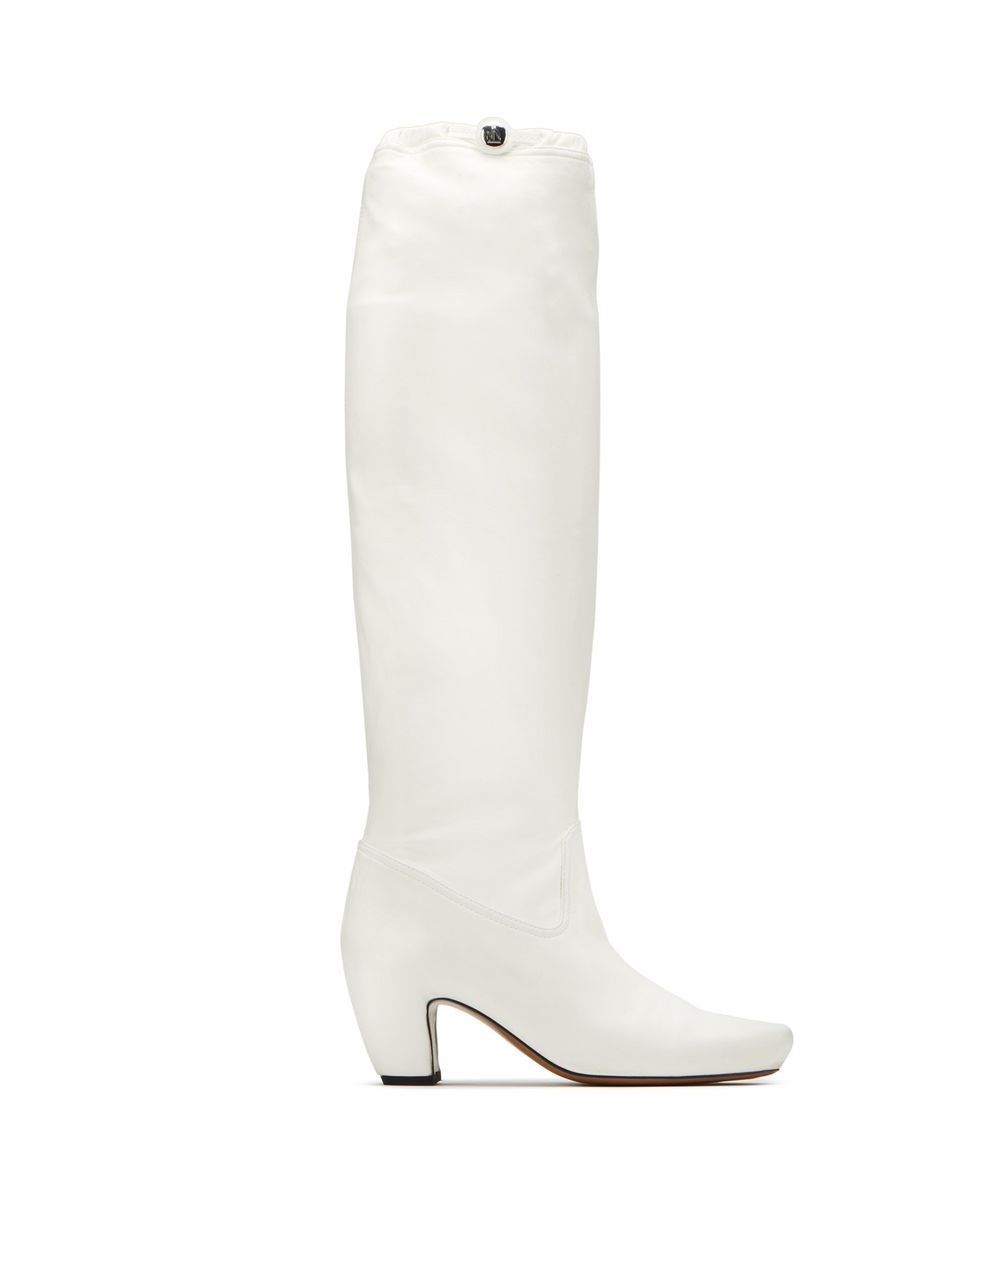 Lanvin TALL LEATHER BOOTS, Boots Women 